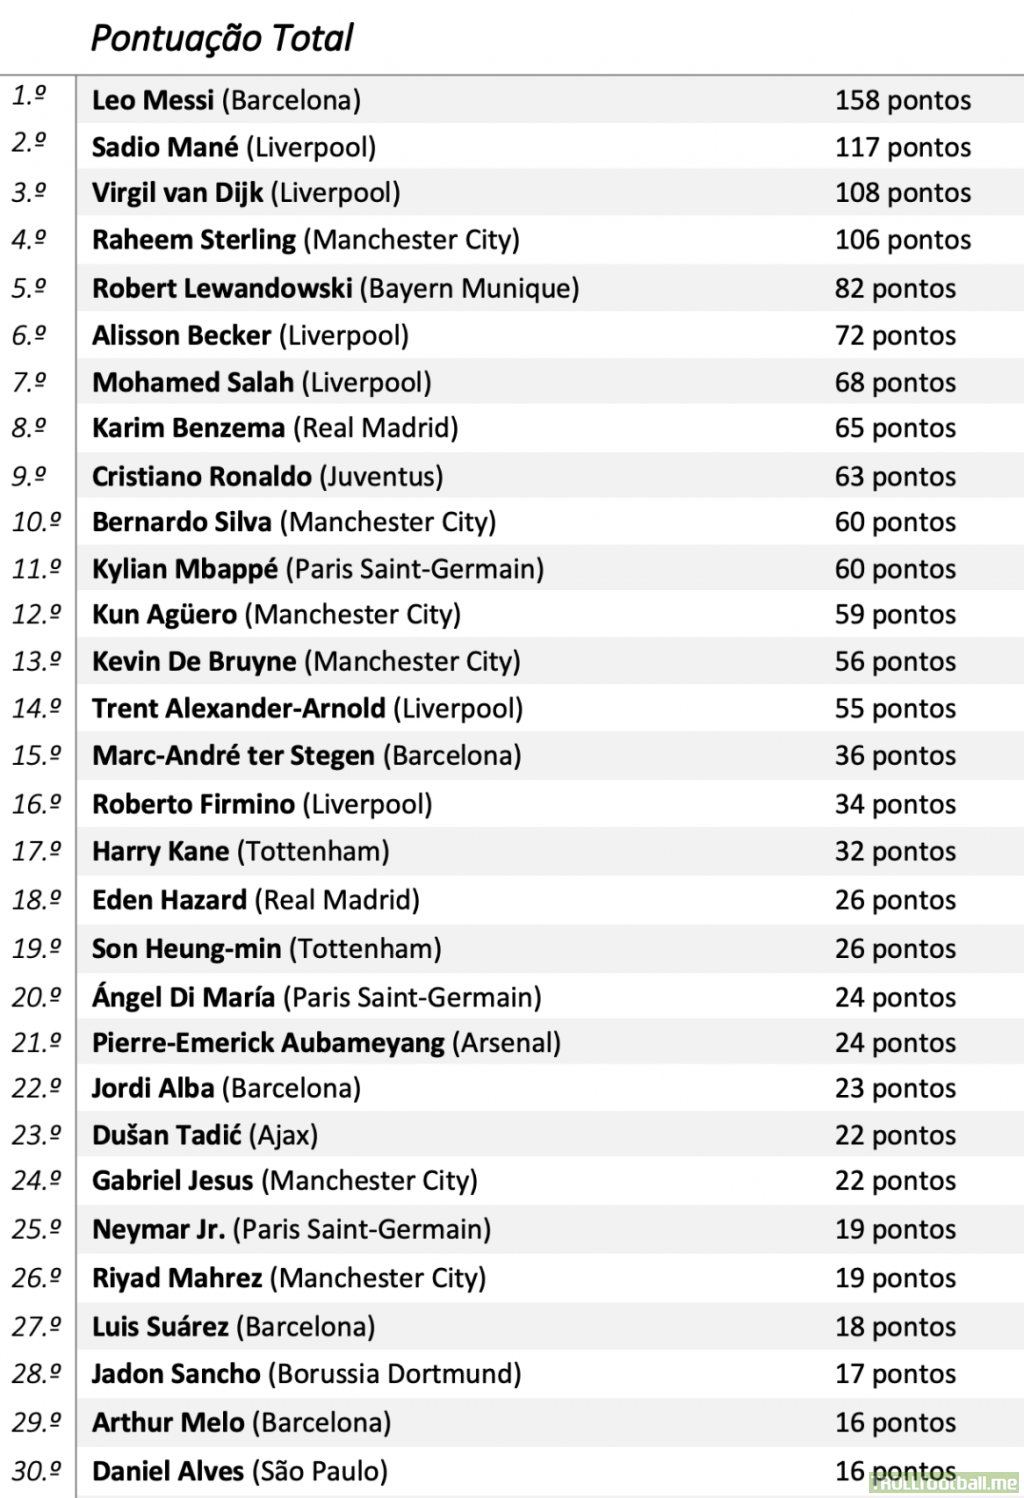 Top 30 Players of 2019 according to VM (Portuguese blog)